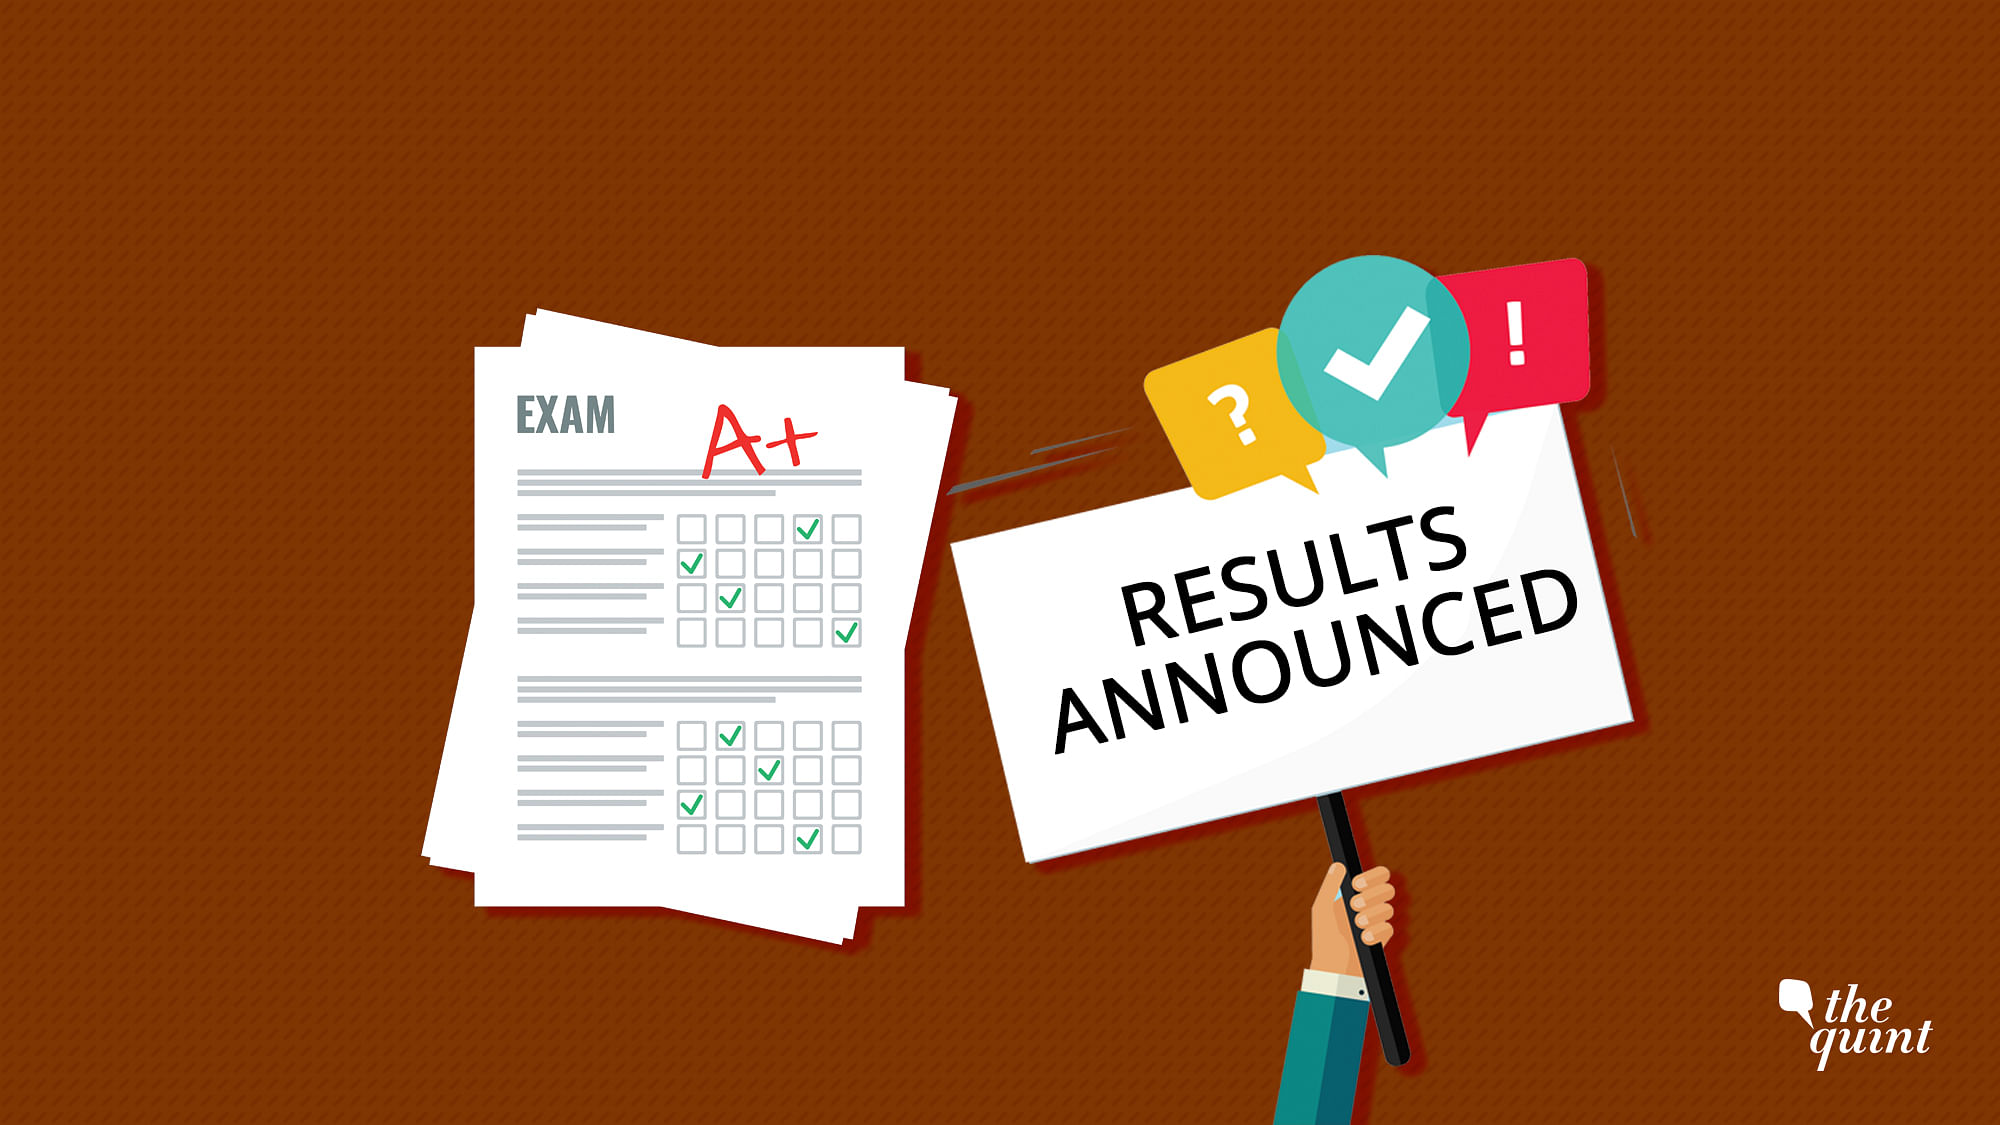 ICSE ISC Result 2019: ICSE Class 10 and ISC Class 12 Results are out.